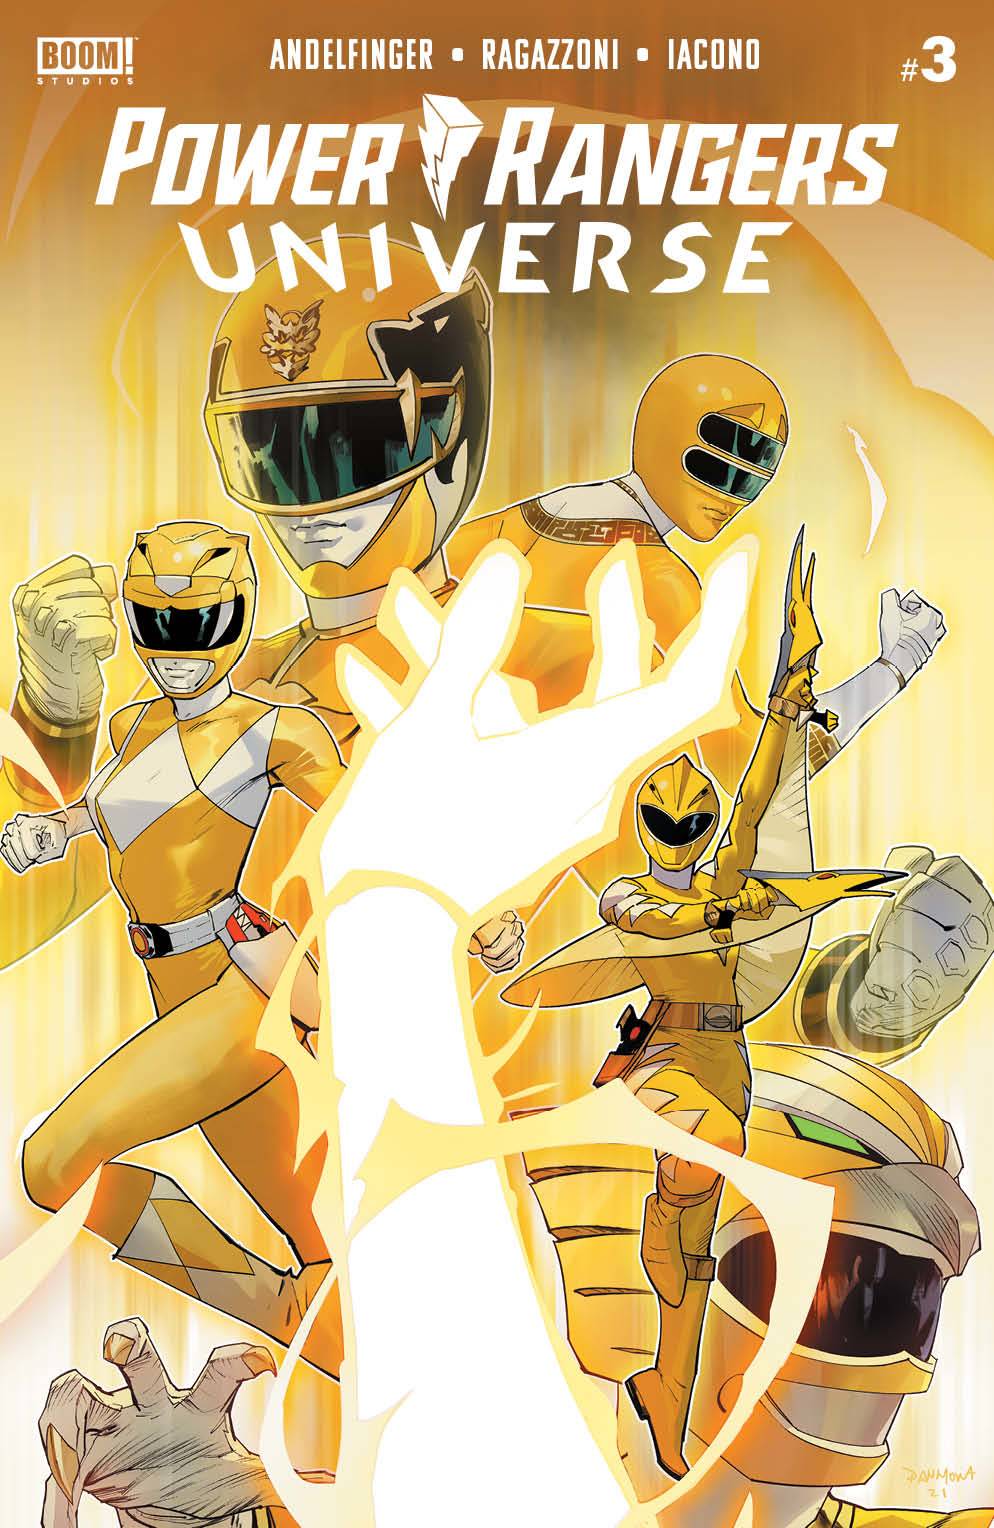 Power Rangers Universe #3 Cover A Mora (Of 6)